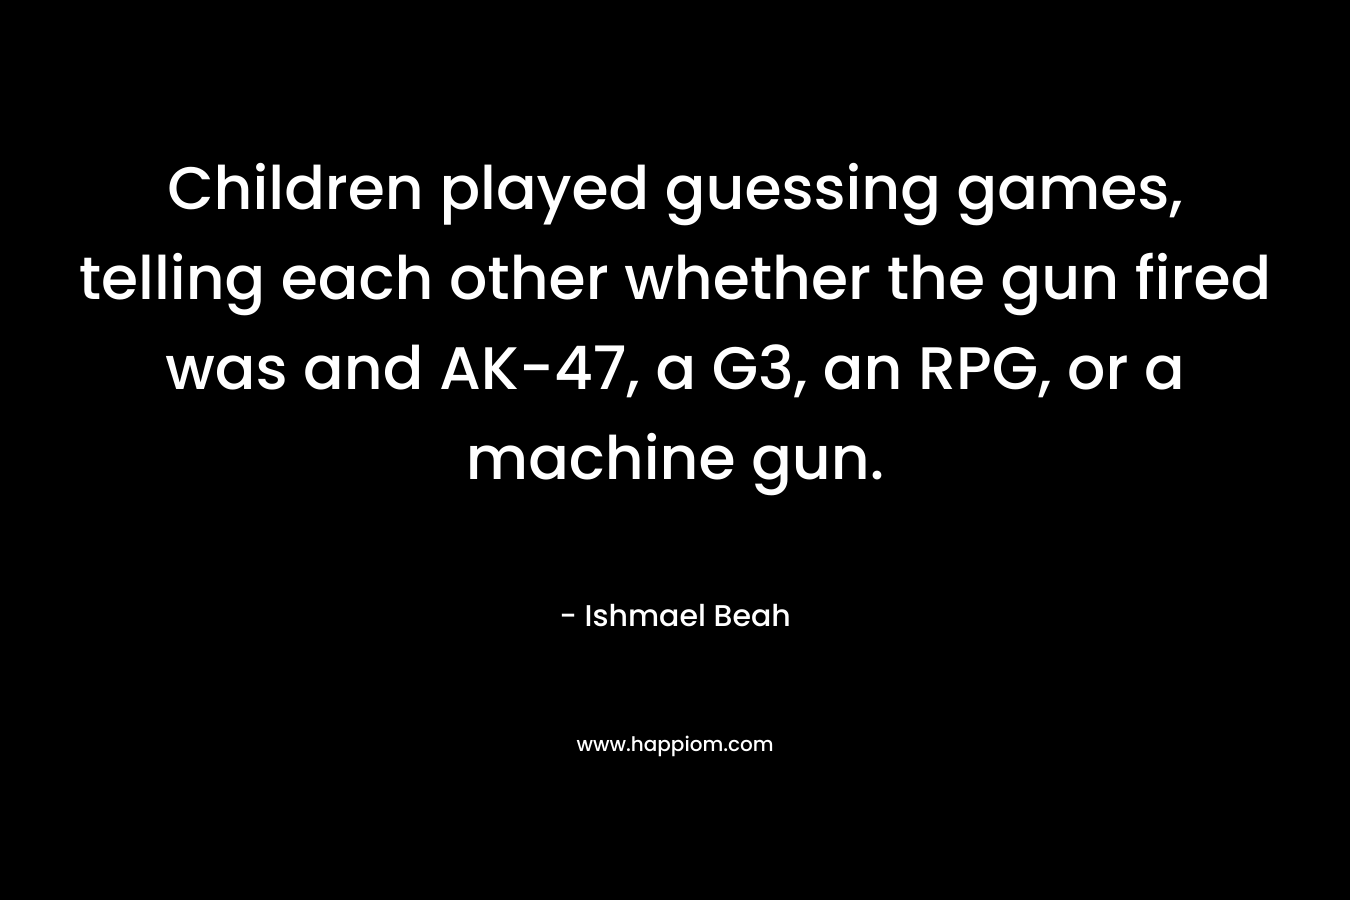 Children played guessing games, telling each other whether the gun fired was and AK-47, a G3, an RPG, or a machine gun.